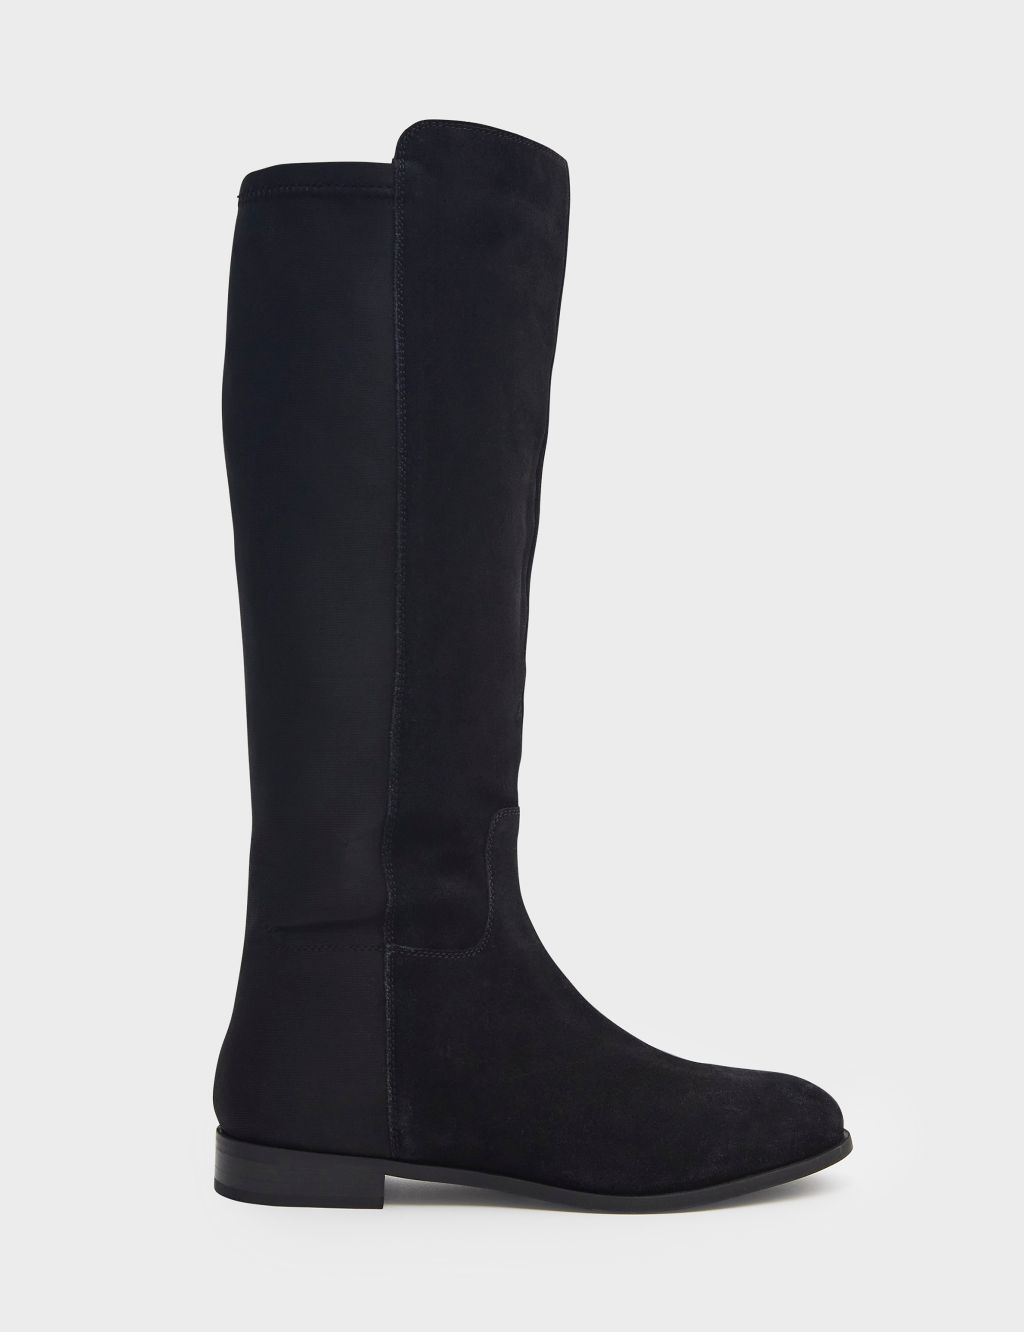 Suede Flat Knee High Boots | Crew Clothing | M&S